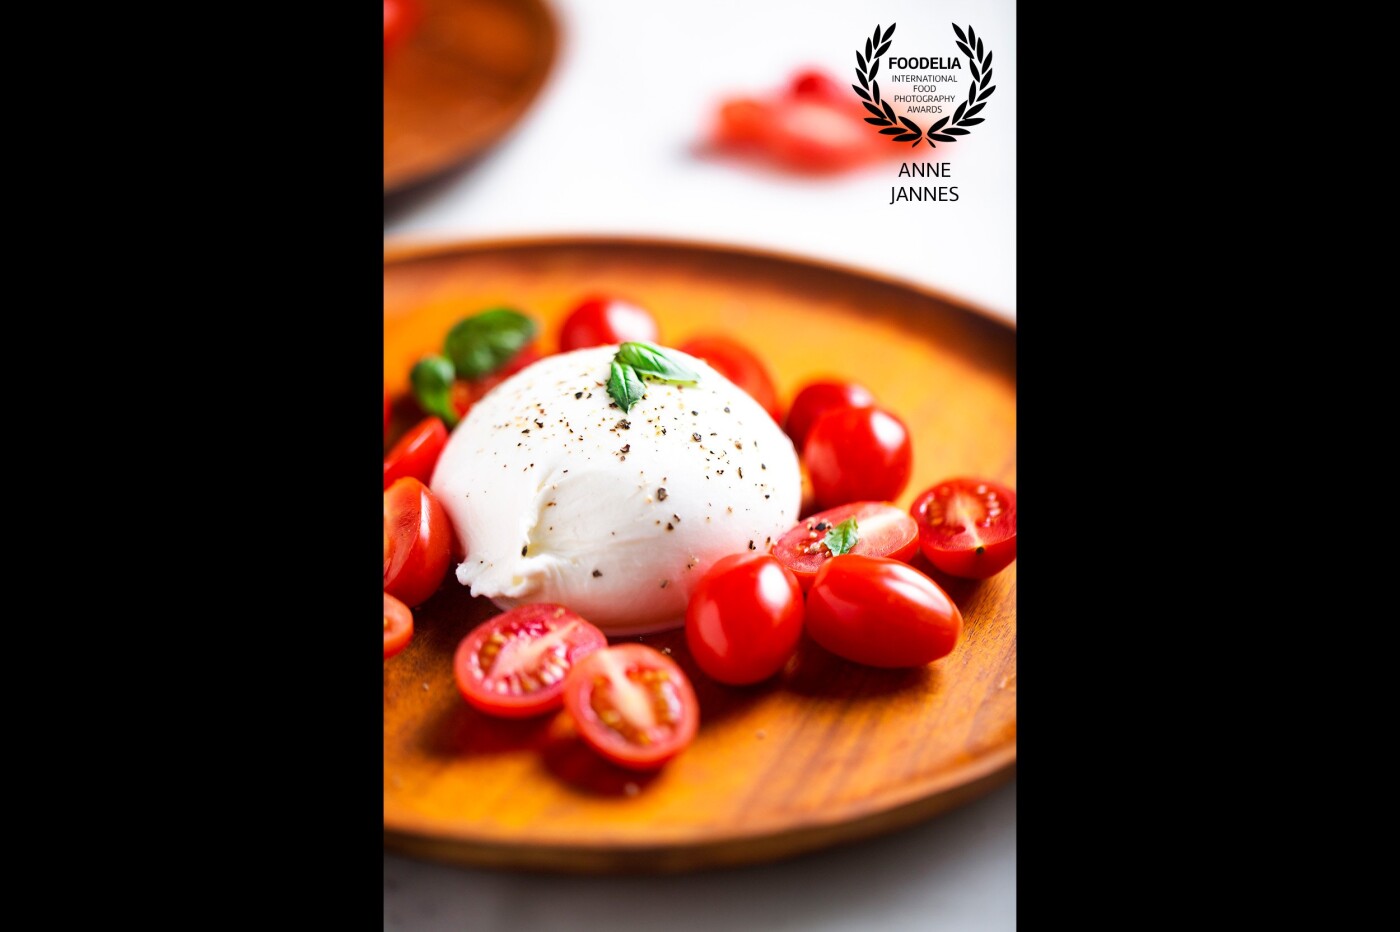 This was the best burrata I have ever tasted. It is on the menu of Vino and friends Maastricht. It only needed some pepper, salt and delicious tomatoes. Simple is often also very good food.